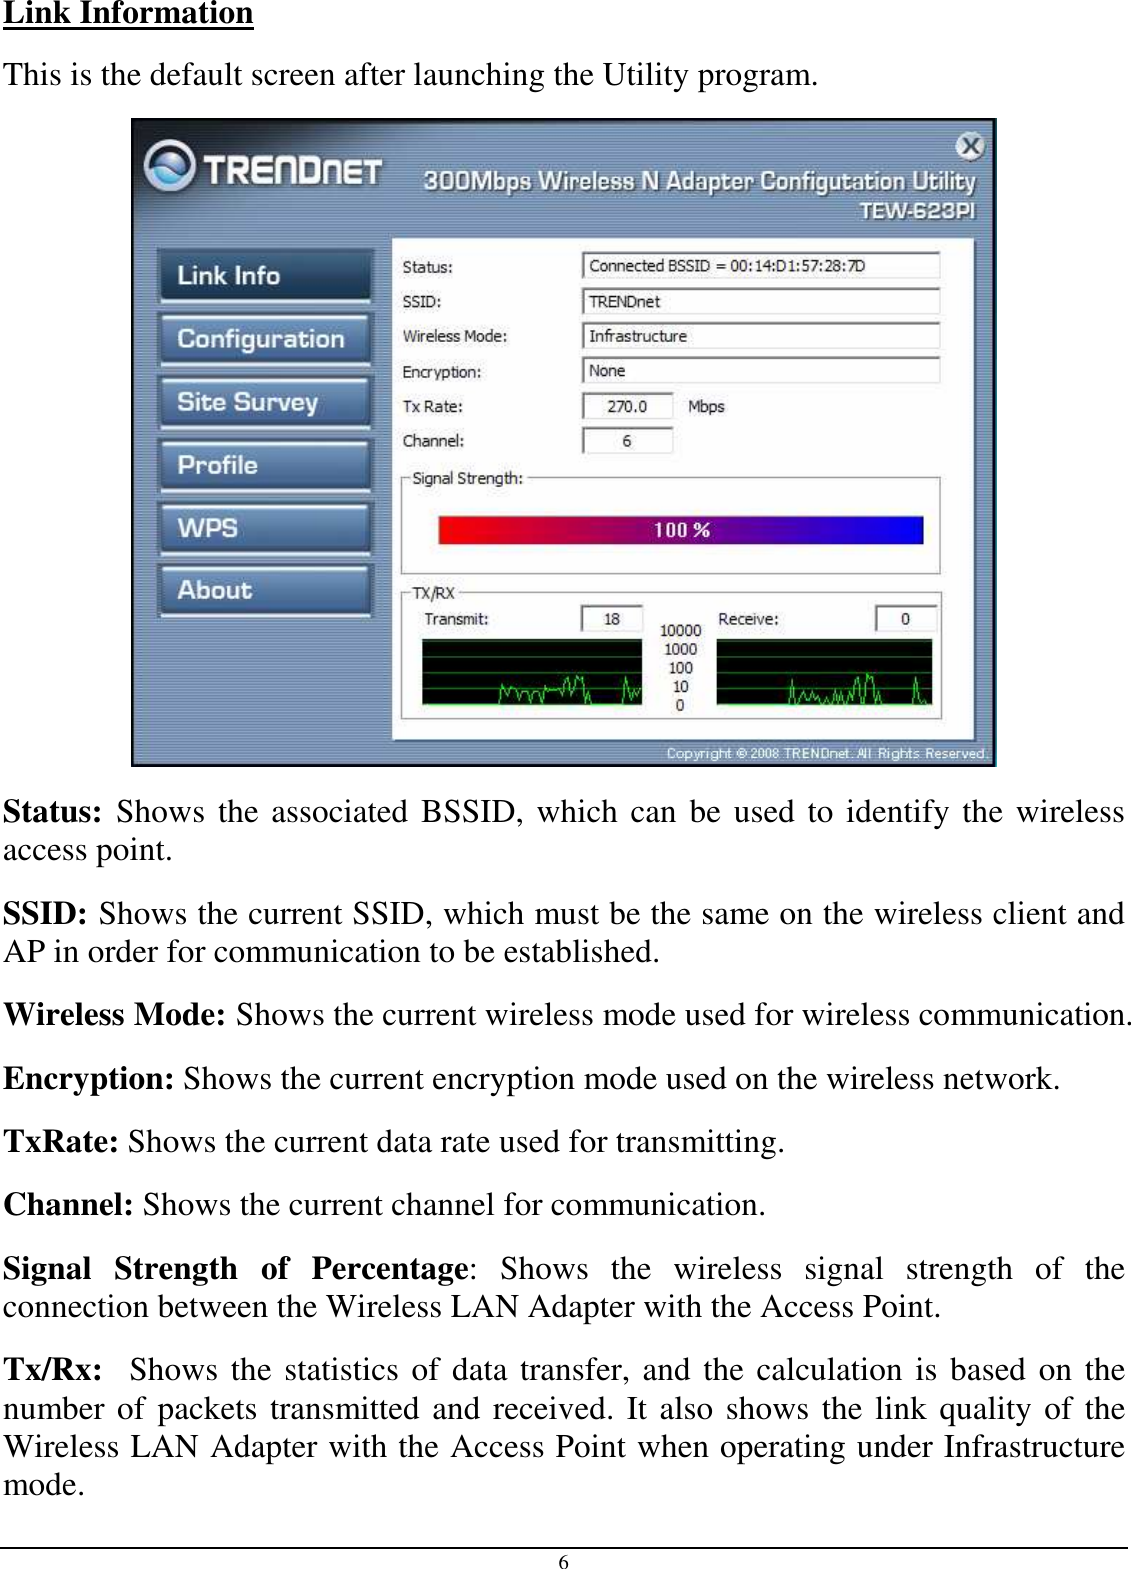 6 Link Information This is the default screen after launching the Utility program.  Status: Shows the associated BSSID, which can be used to identify the wireless access point. SSID: Shows the current SSID, which must be the same on the wireless client and AP in order for communication to be established. Wireless Mode: Shows the current wireless mode used for wireless communication. Encryption: Shows the current encryption mode used on the wireless network. TxRate: Shows the current data rate used for transmitting. Channel: Shows the current channel for communication. Signal  Strength  of  Percentage:  Shows  the  wireless  signal  strength  of  the connection between the Wireless LAN Adapter with the Access Point. Tx/Rx:  Shows the statistics of data transfer, and the calculation is based on the number of packets transmitted and received. It also shows the link quality of the Wireless LAN Adapter with the Access Point when operating under Infrastructure mode. 